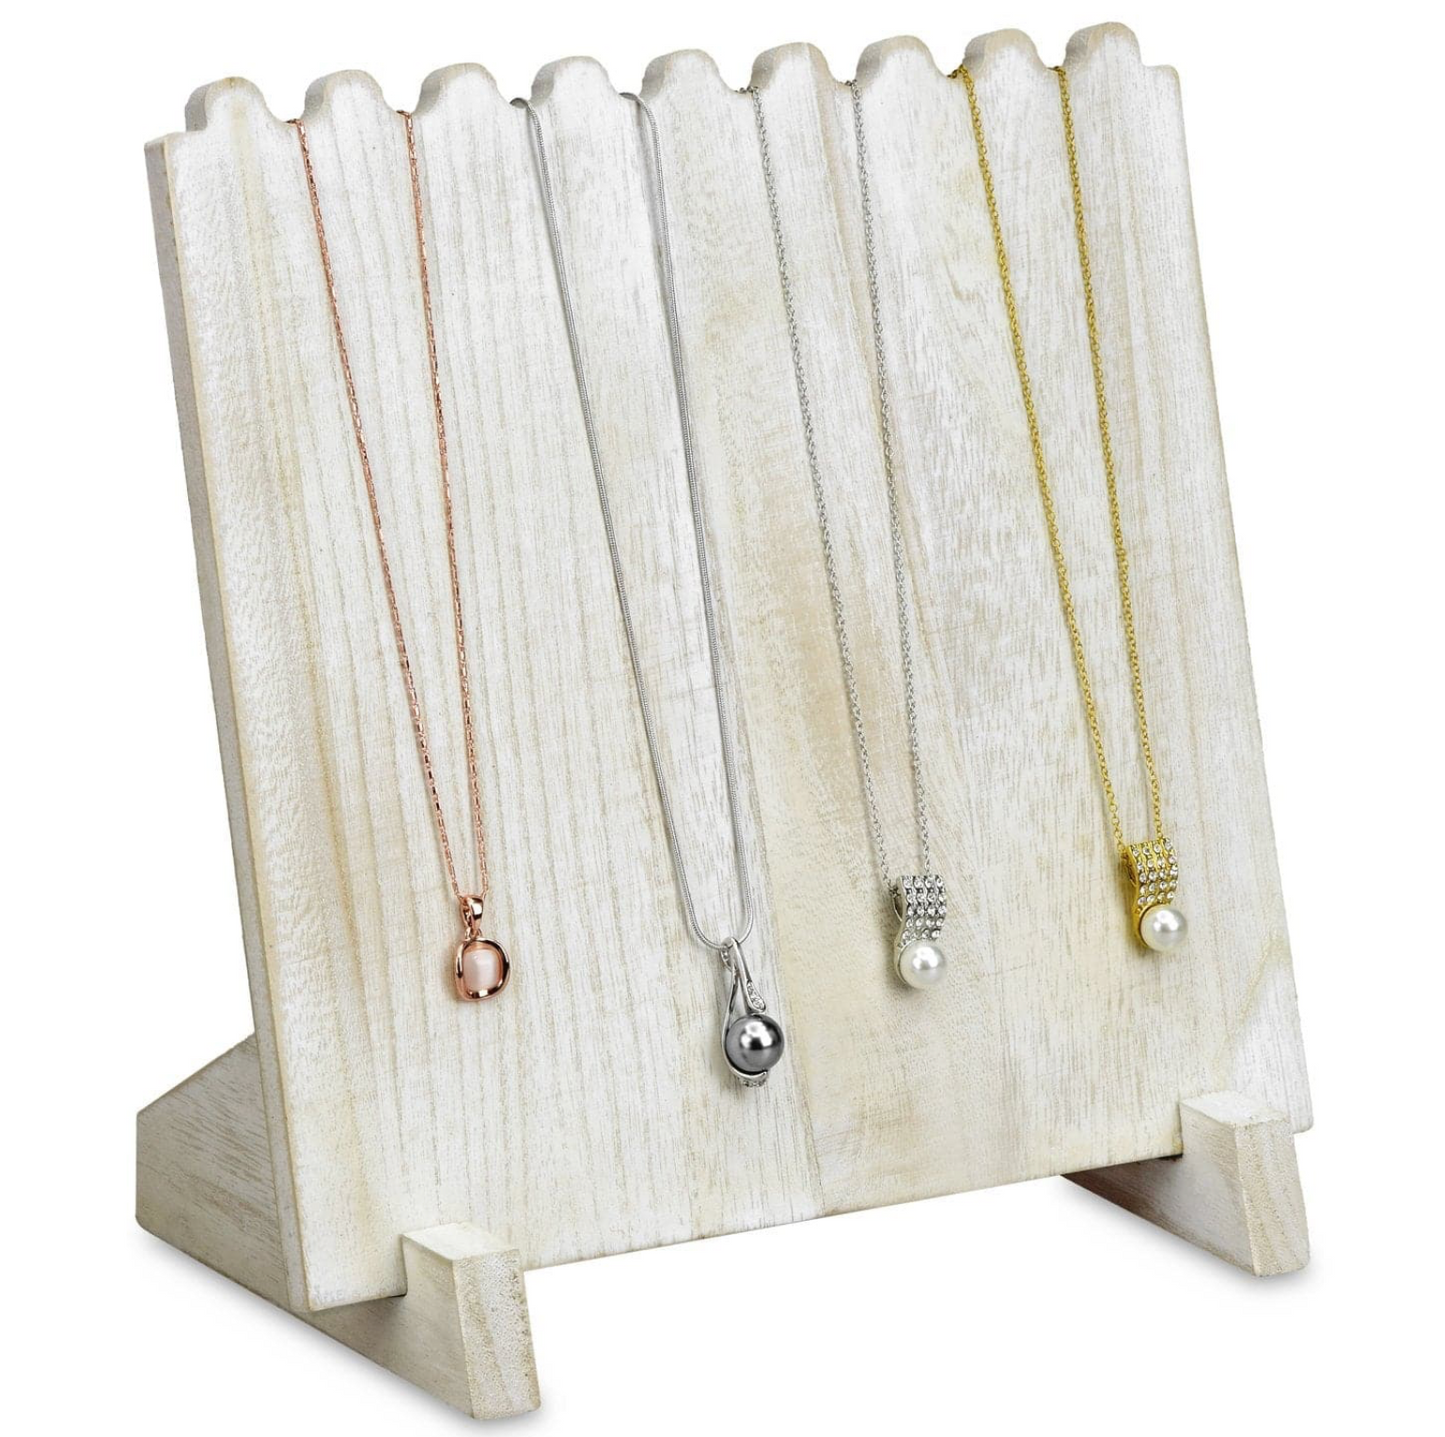 Wooden Plank Necklace Display - Brown